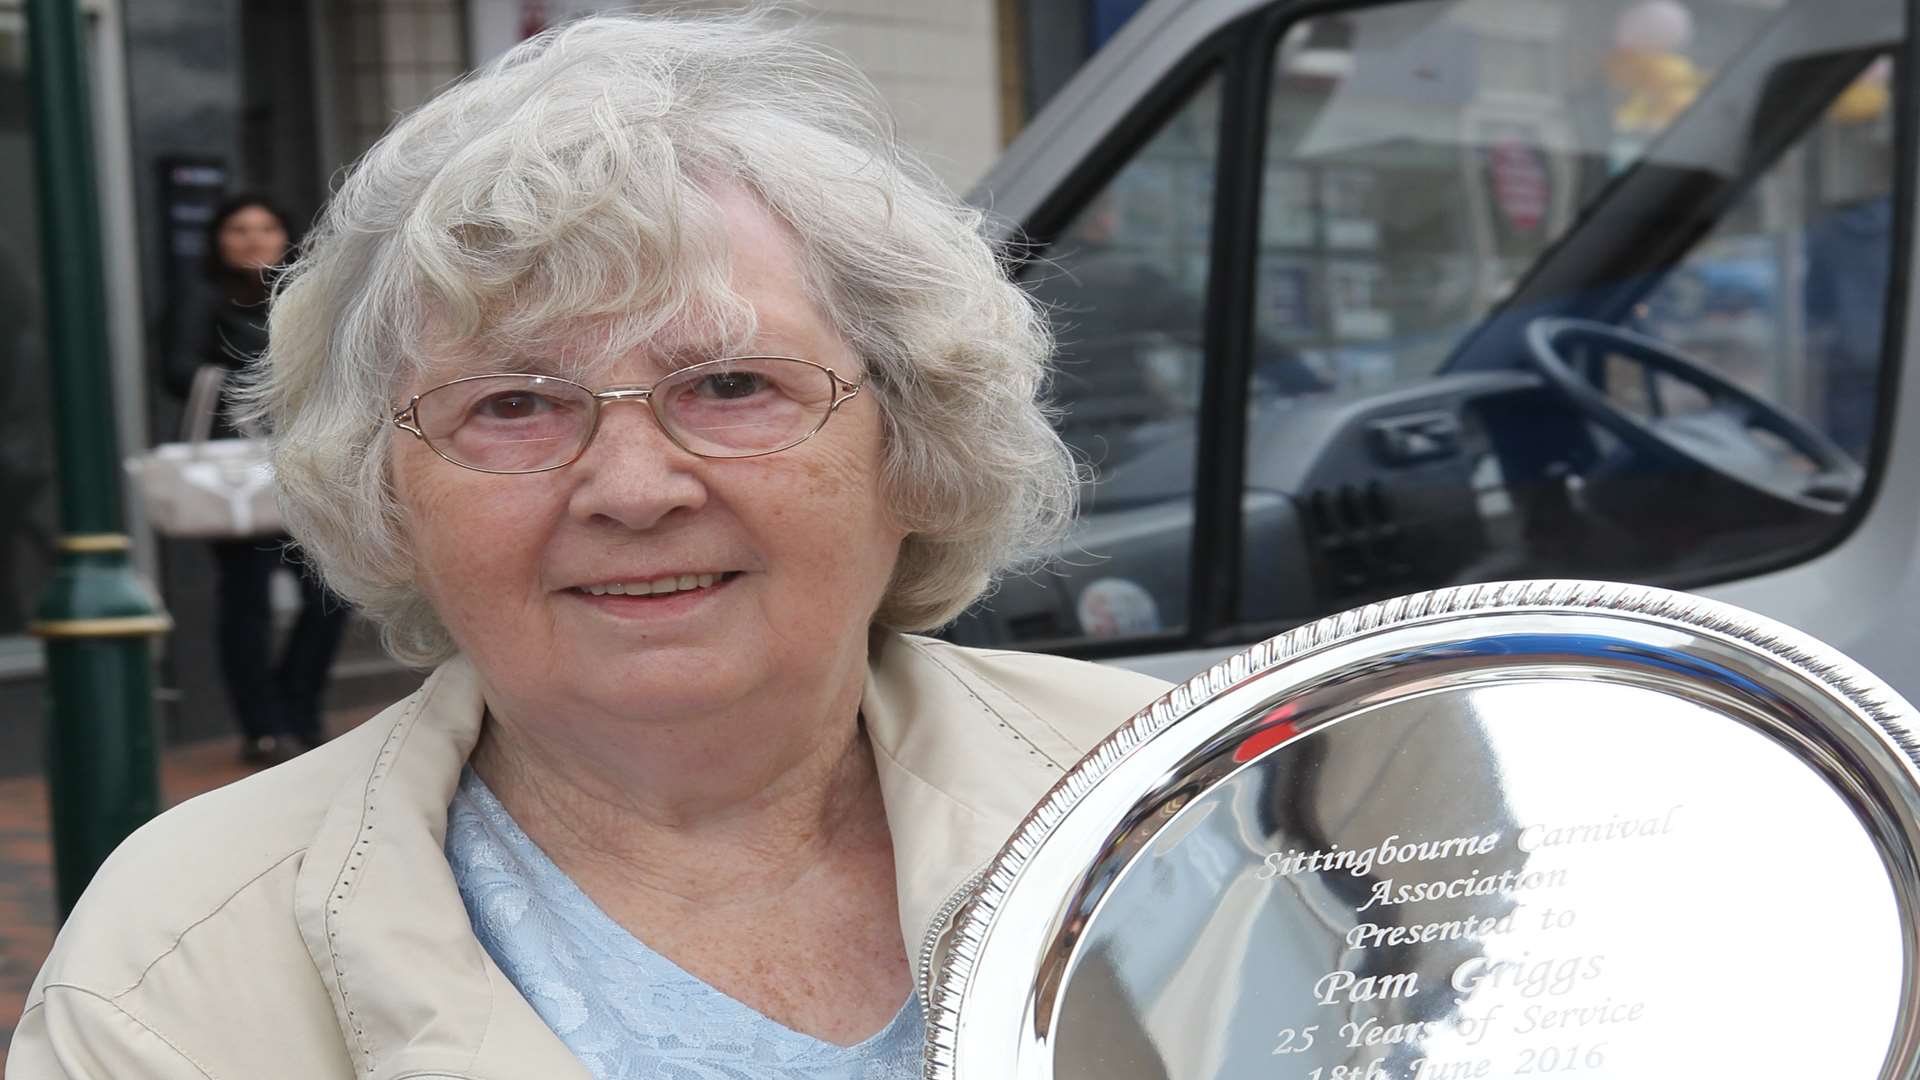 Retired after 27 years: Sittingbourne carnival boss Pam Griggs